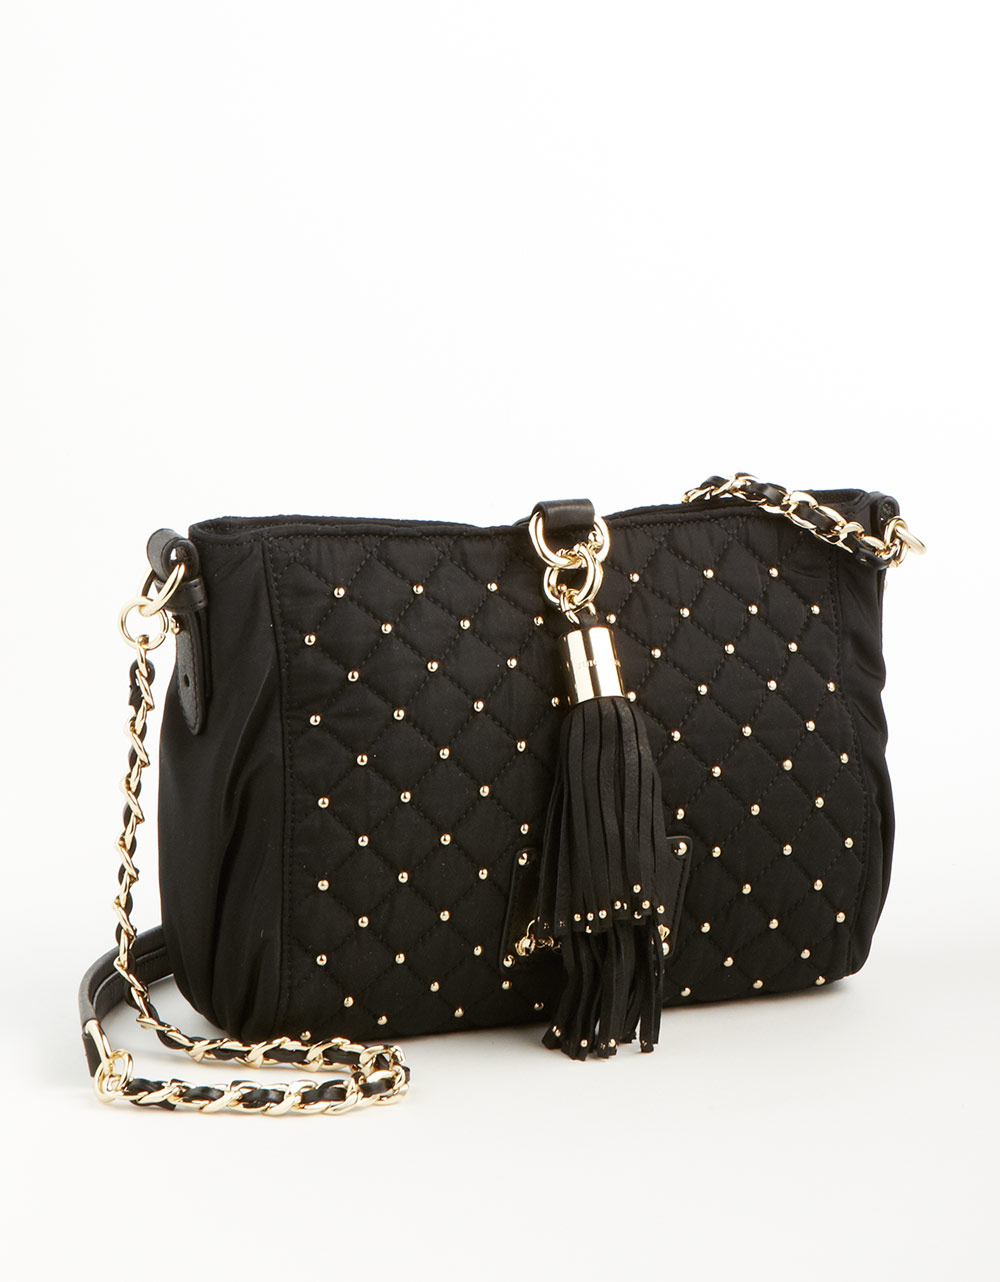 Juicy Couture Mini Kiki Studded Quilted Shoulder Bag in Black | Lyst